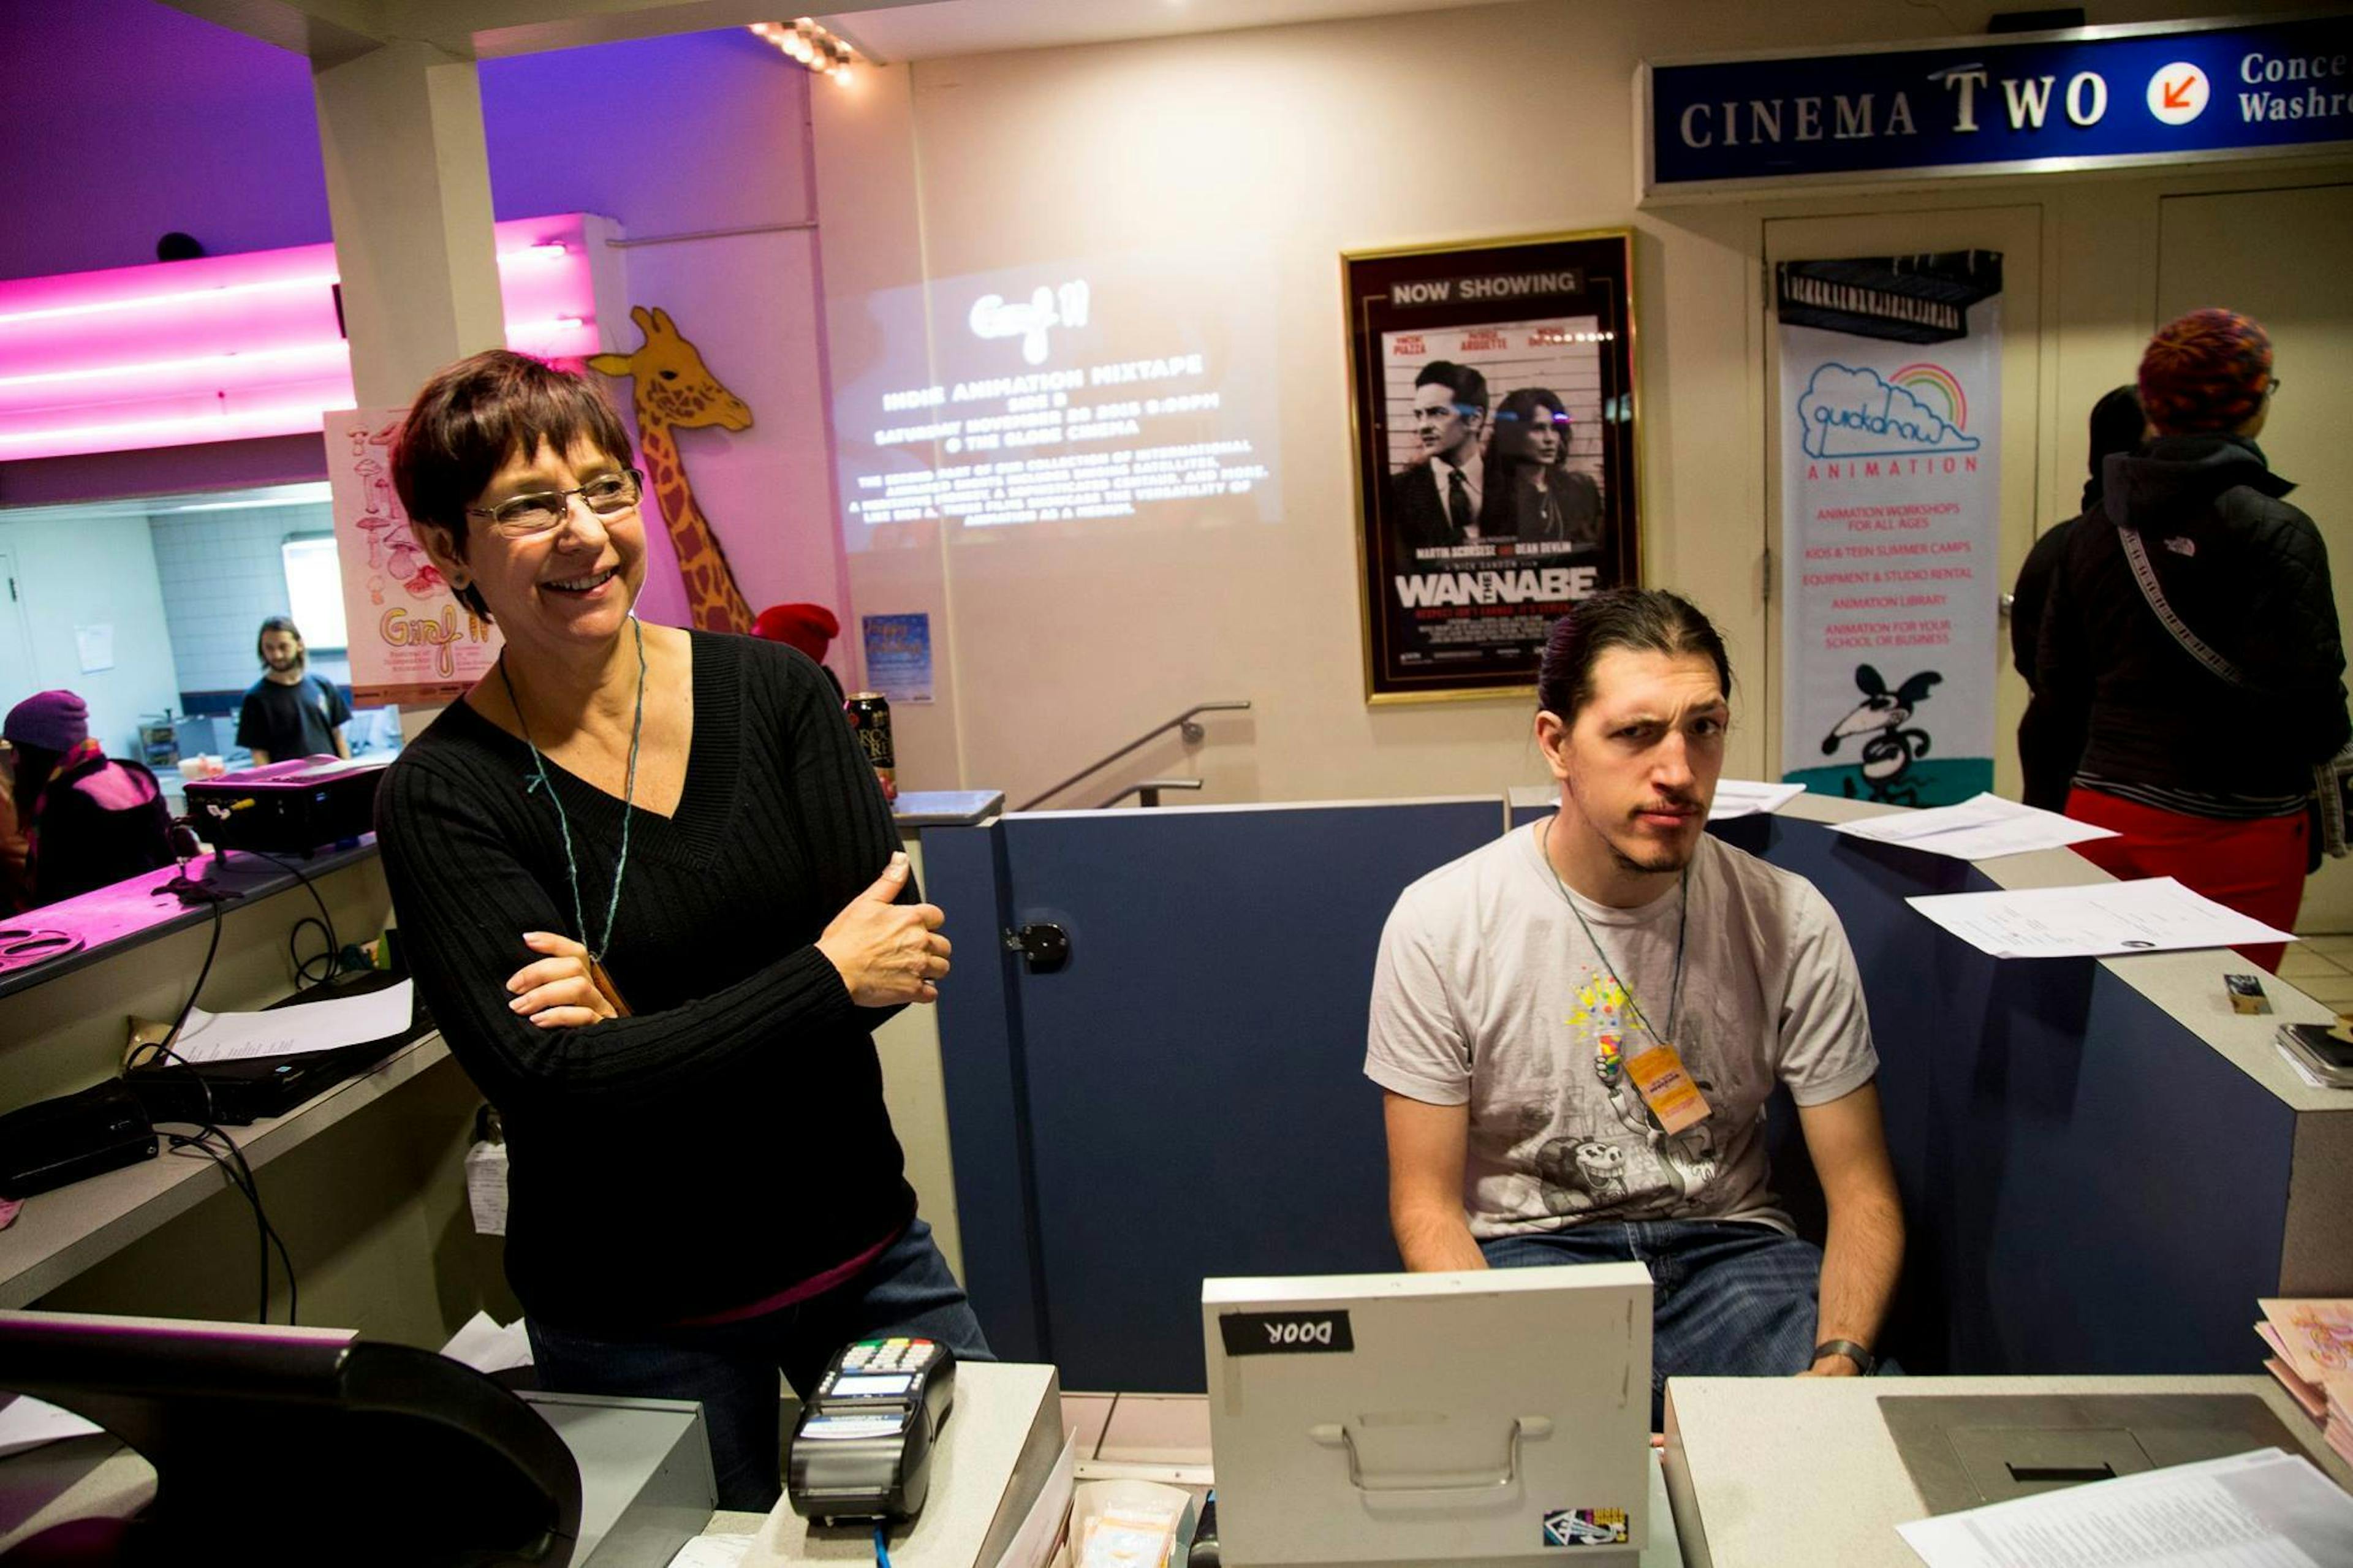 An image of a front desk at a movie theatre. There are two people behind the desk, one of which is Will Walton. Will has long hair tied back into a pony tail, has a short mustache and beard, and is comically raising just one eyebrow. He is sitting, wearing a grey tshirt and a GIRAF11 pass around his neck. 